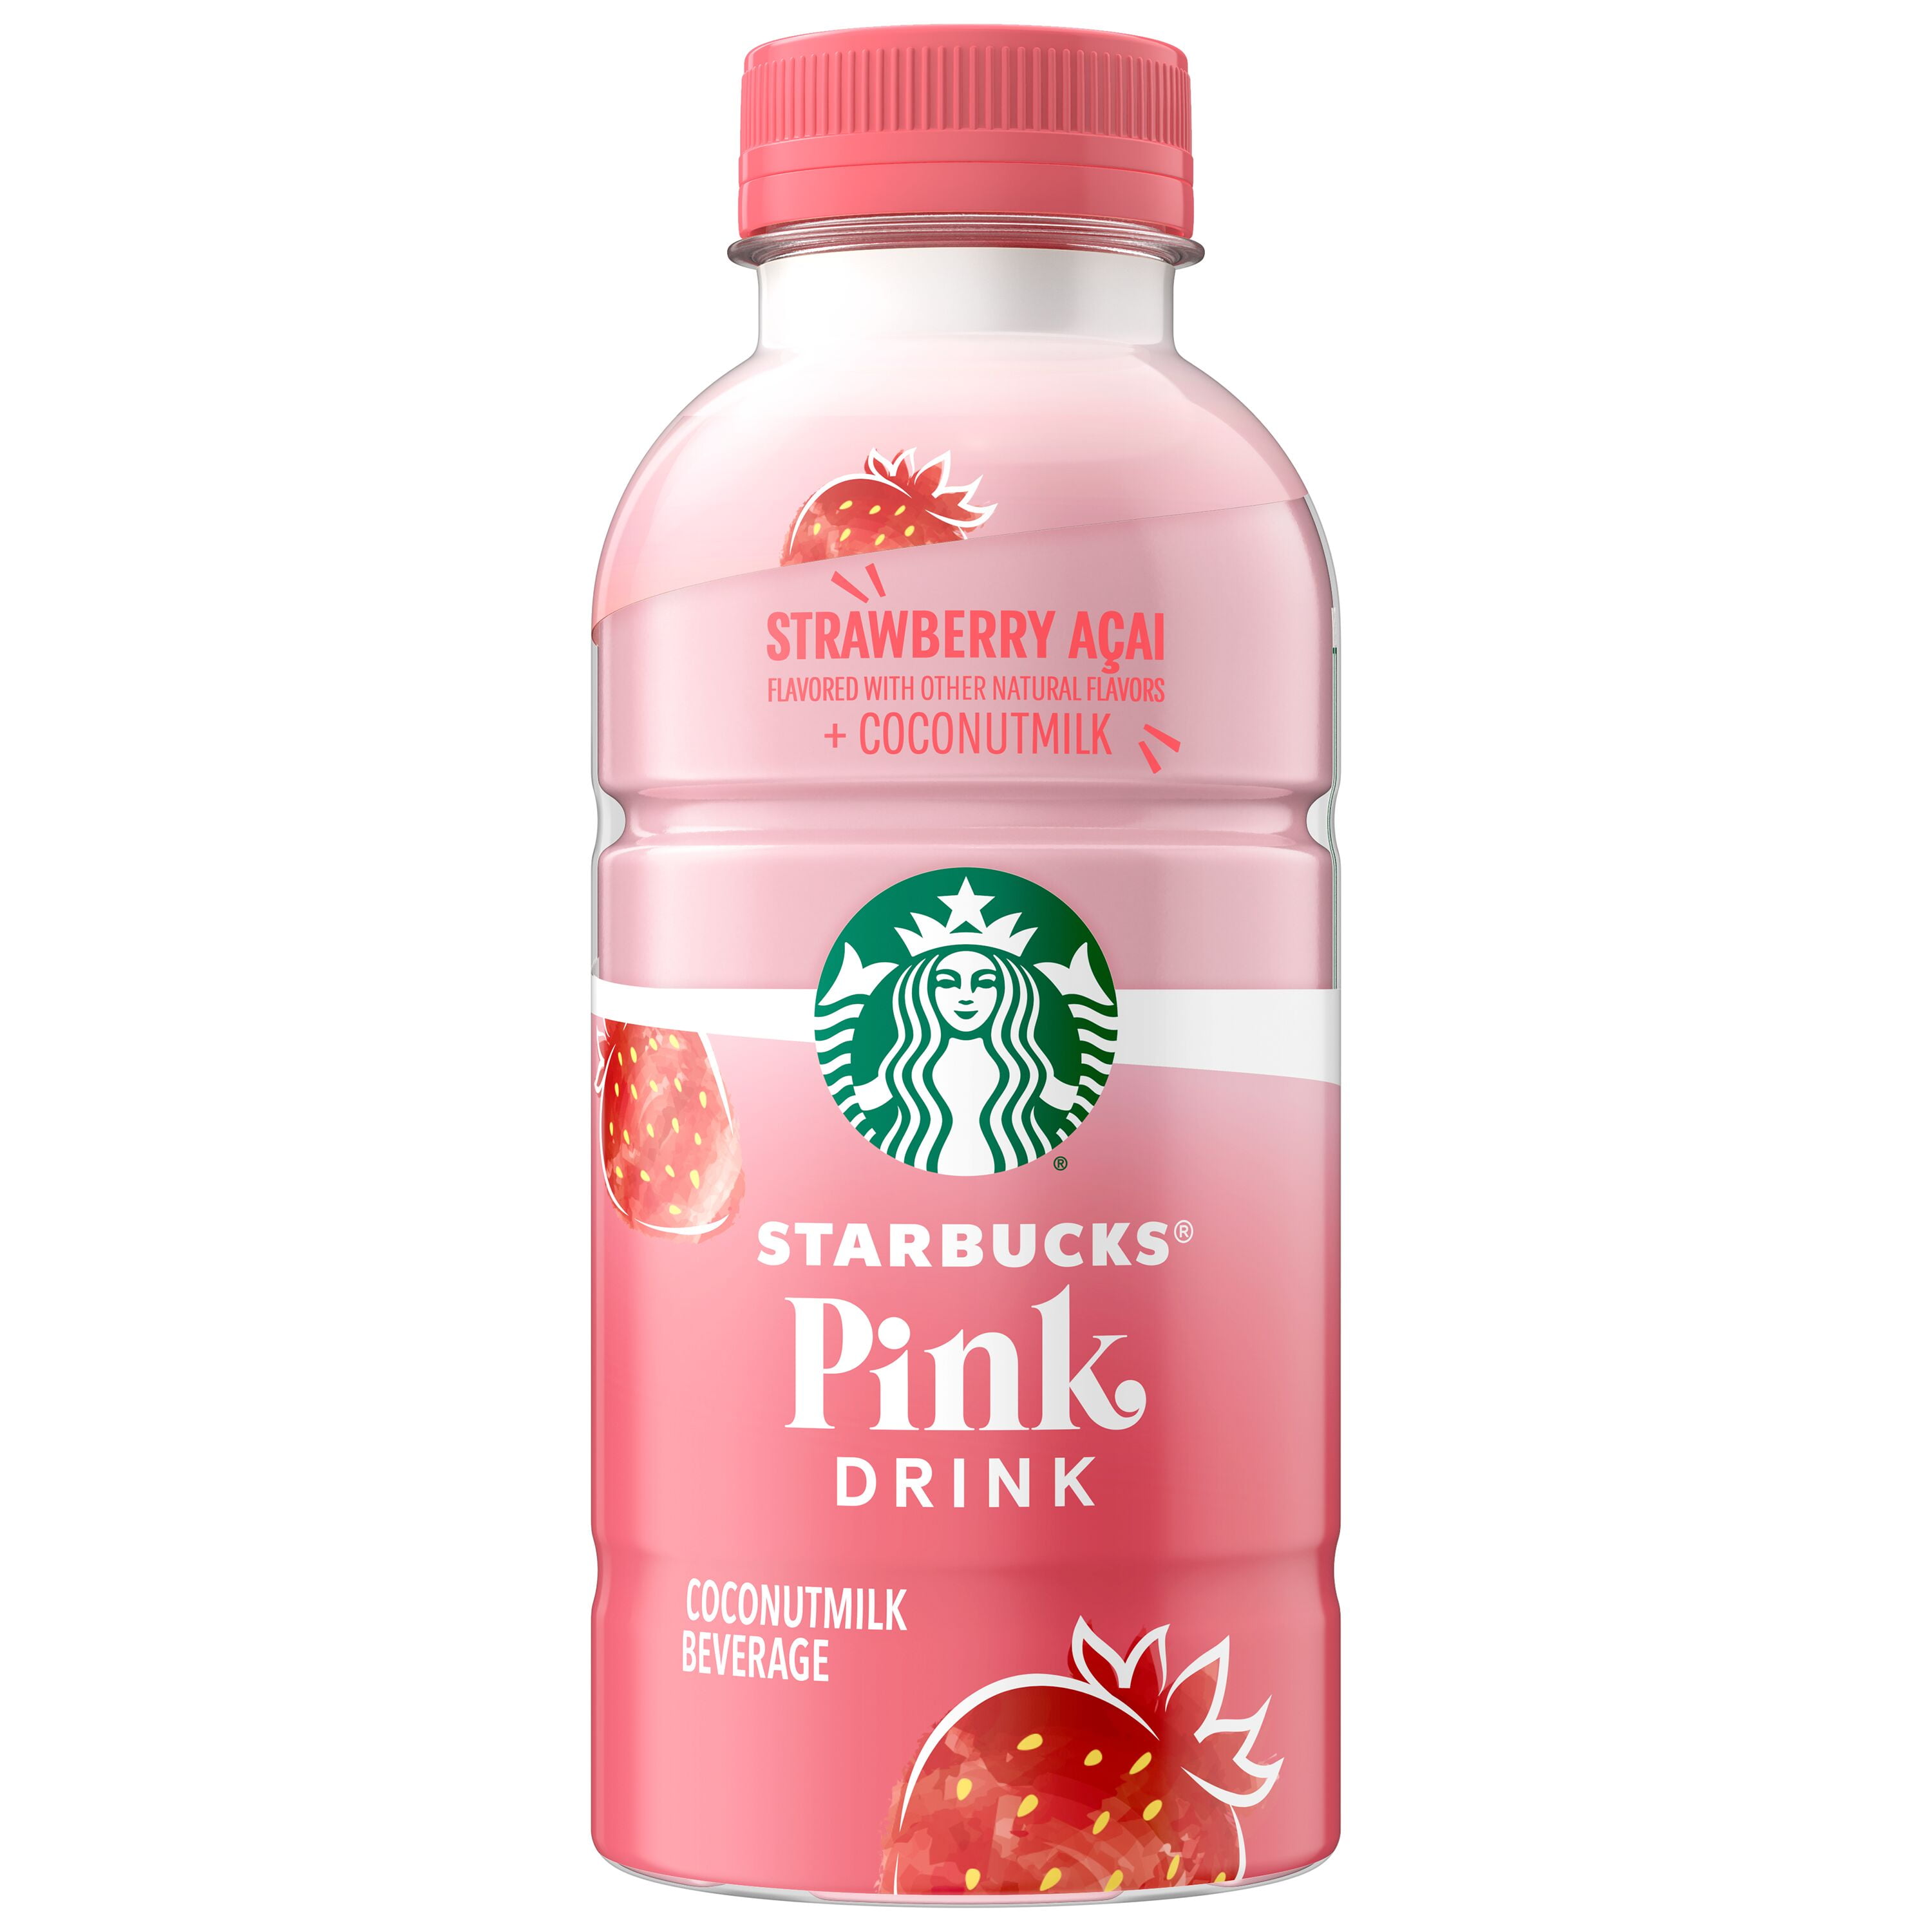 12 Facts You Need To Know About The Starbucks Pink Drink